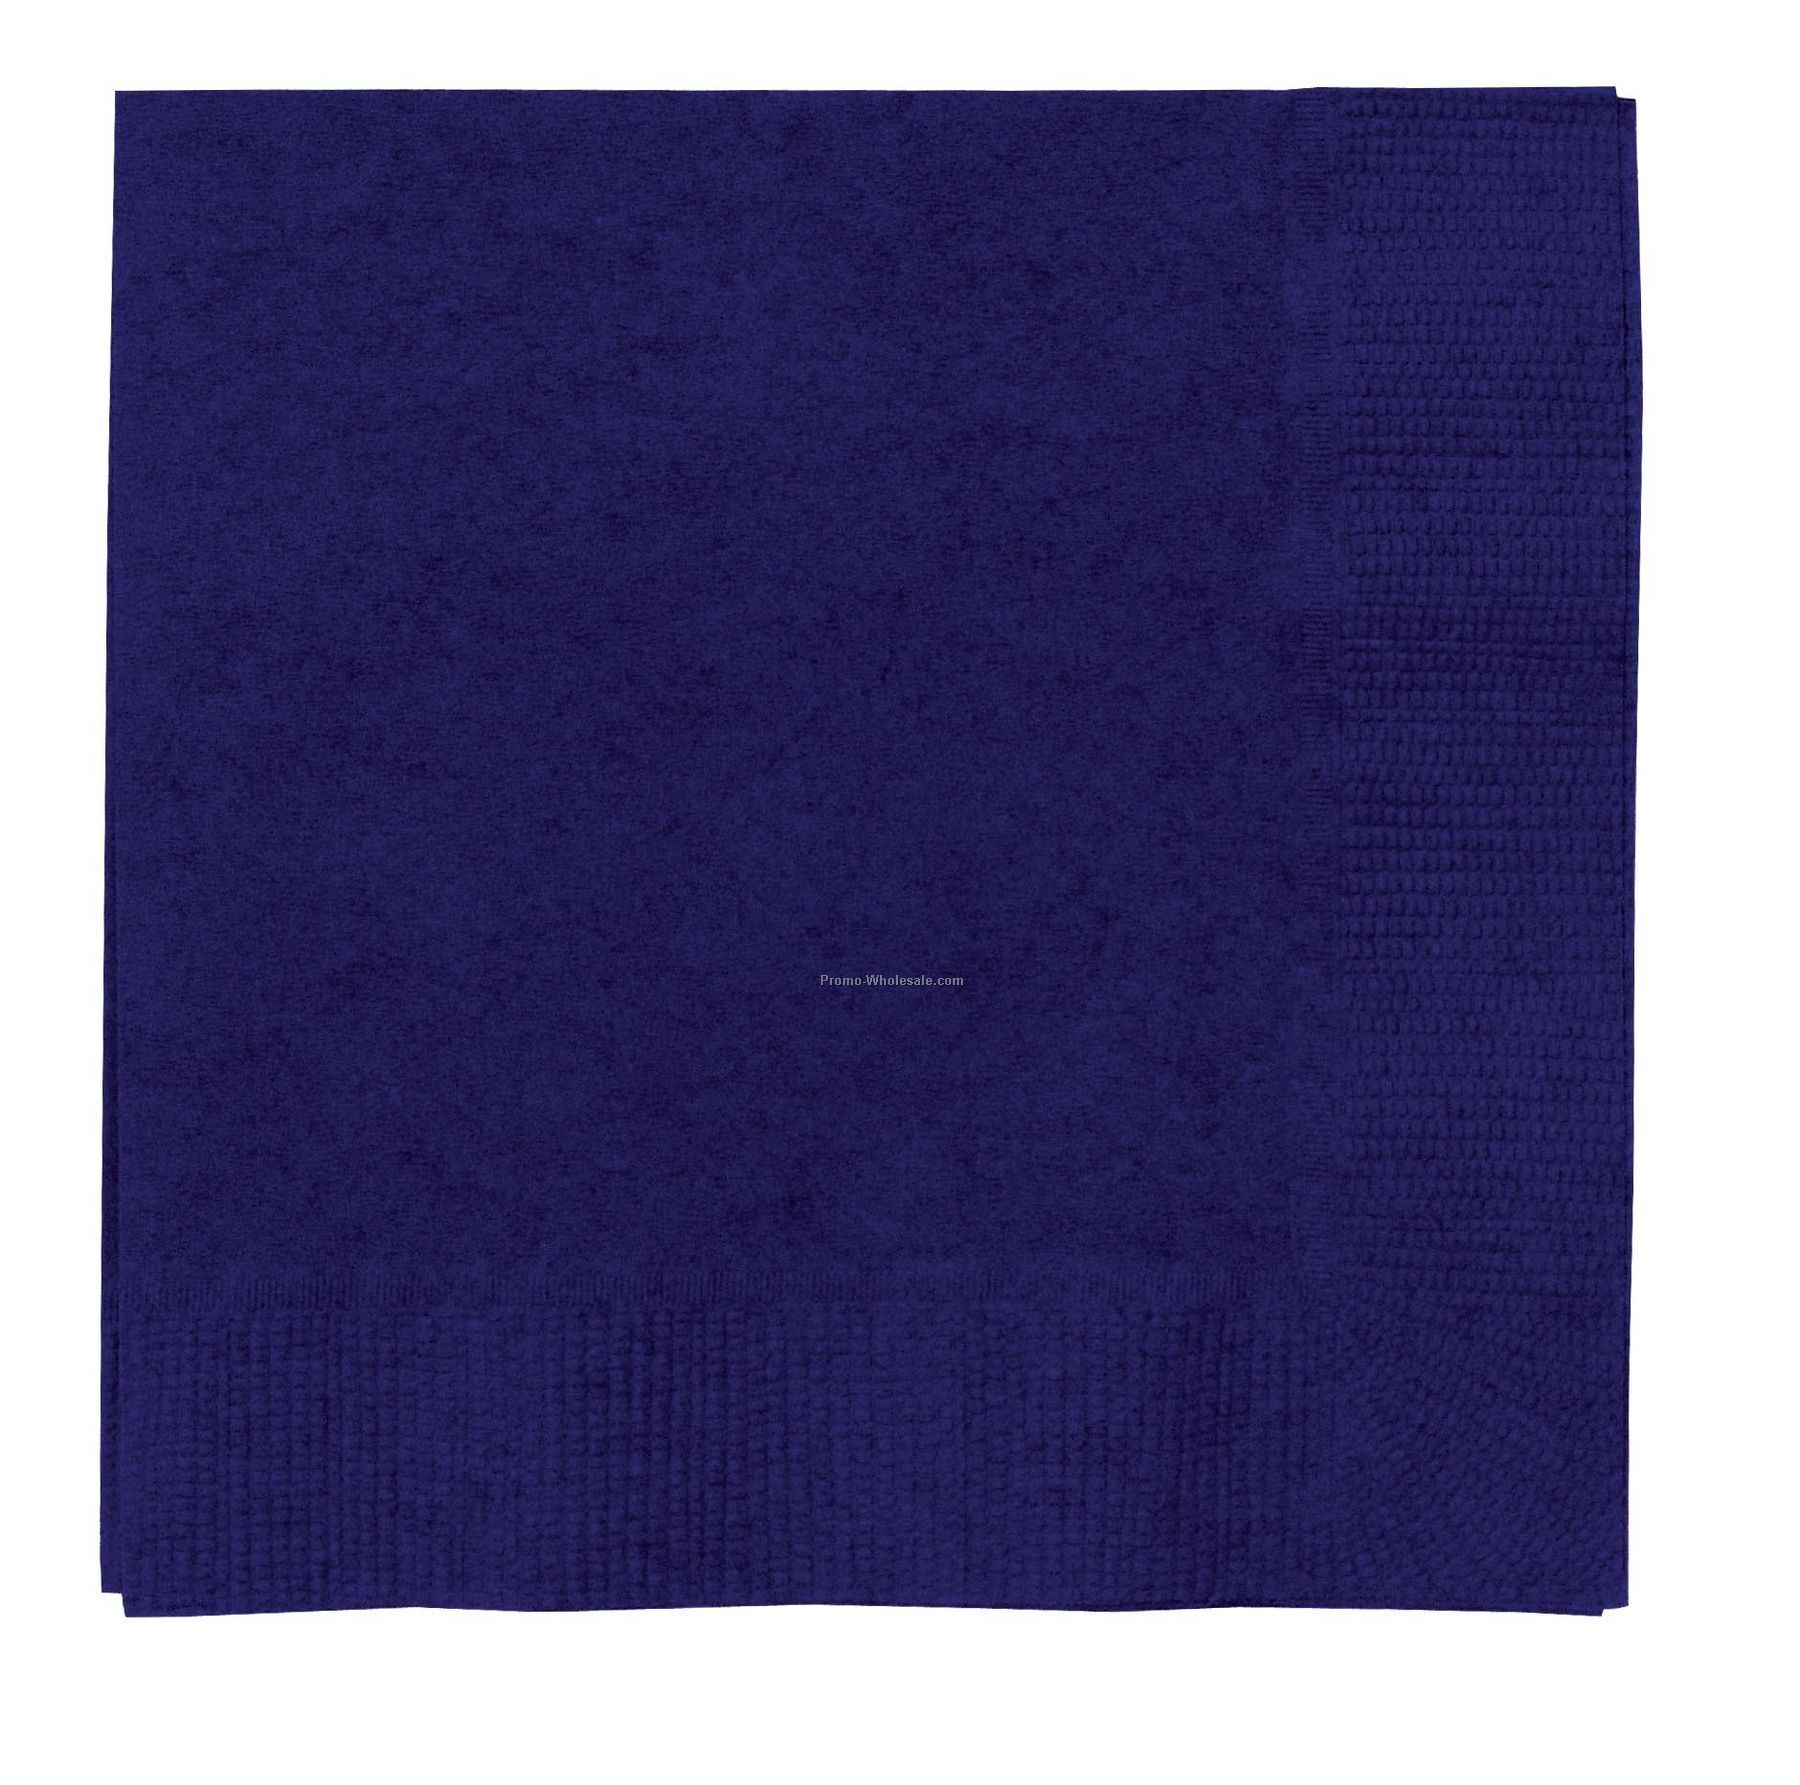 The 500 Line Colorware Navy Blue Luncheon Napkins